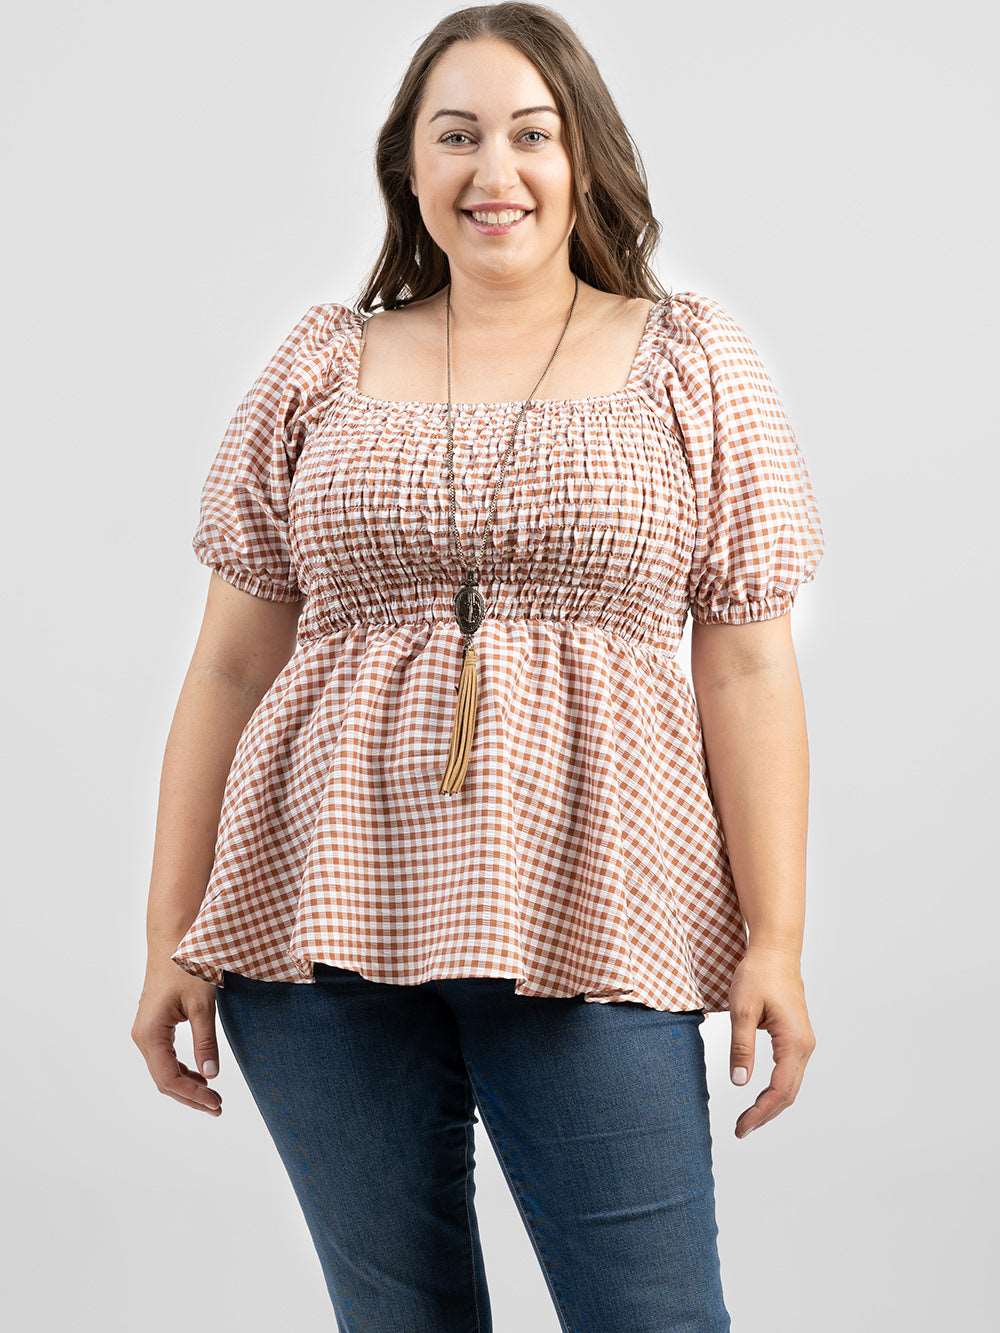 American Bling Plus Size Women Gingham Check Fabric Short Puff Sleeve Top - Montana West World